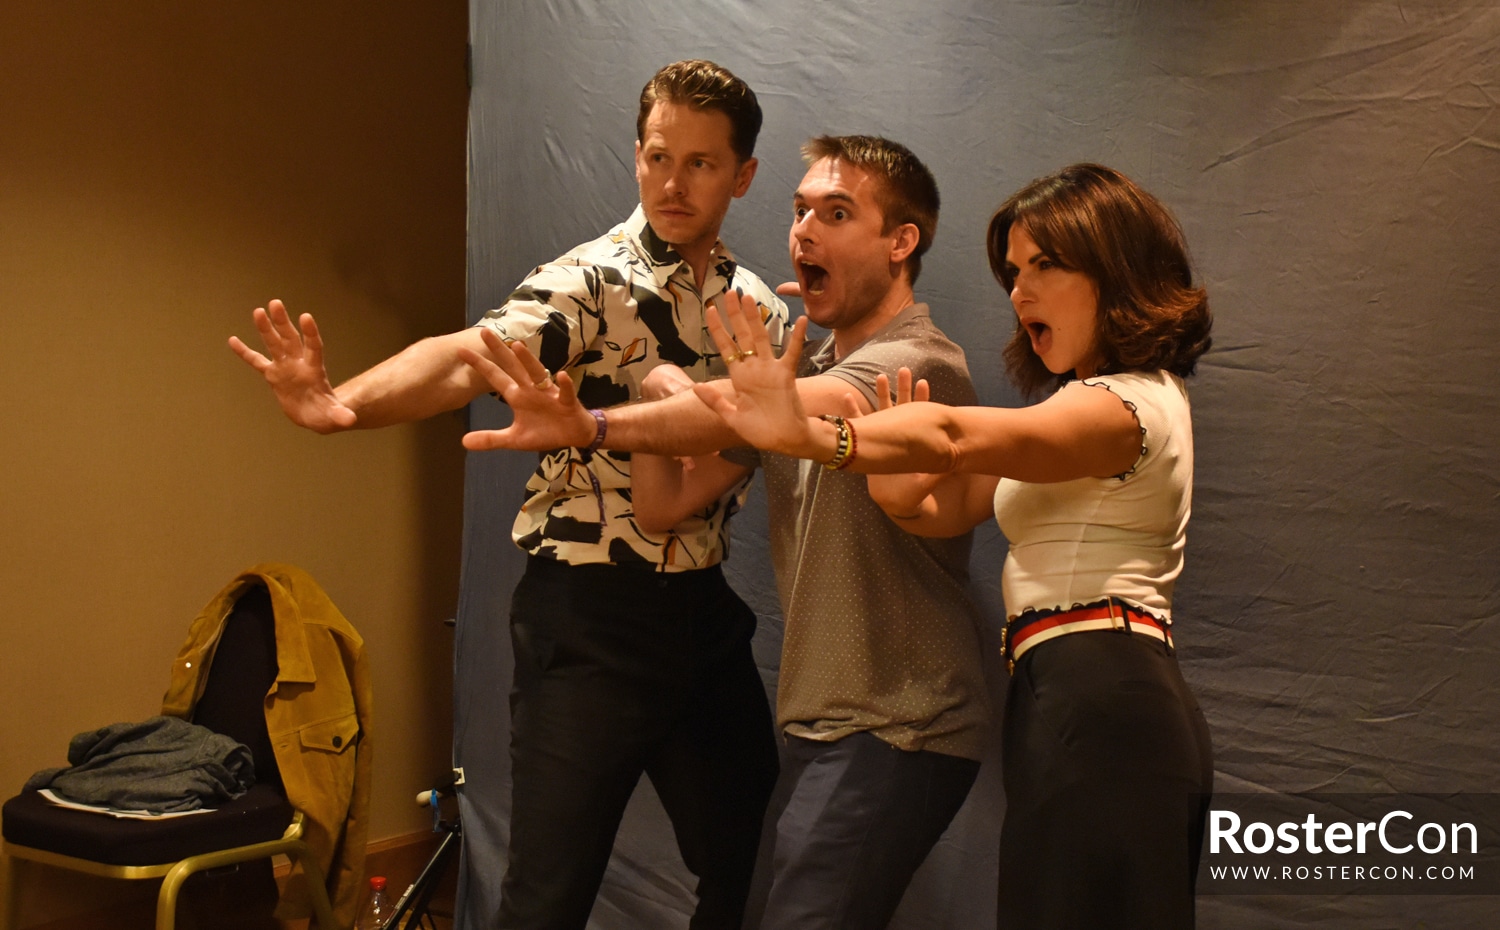 Josh Dallas & Lana Parrilla - The Happy Ending Convention 3 - Once Upon A Time